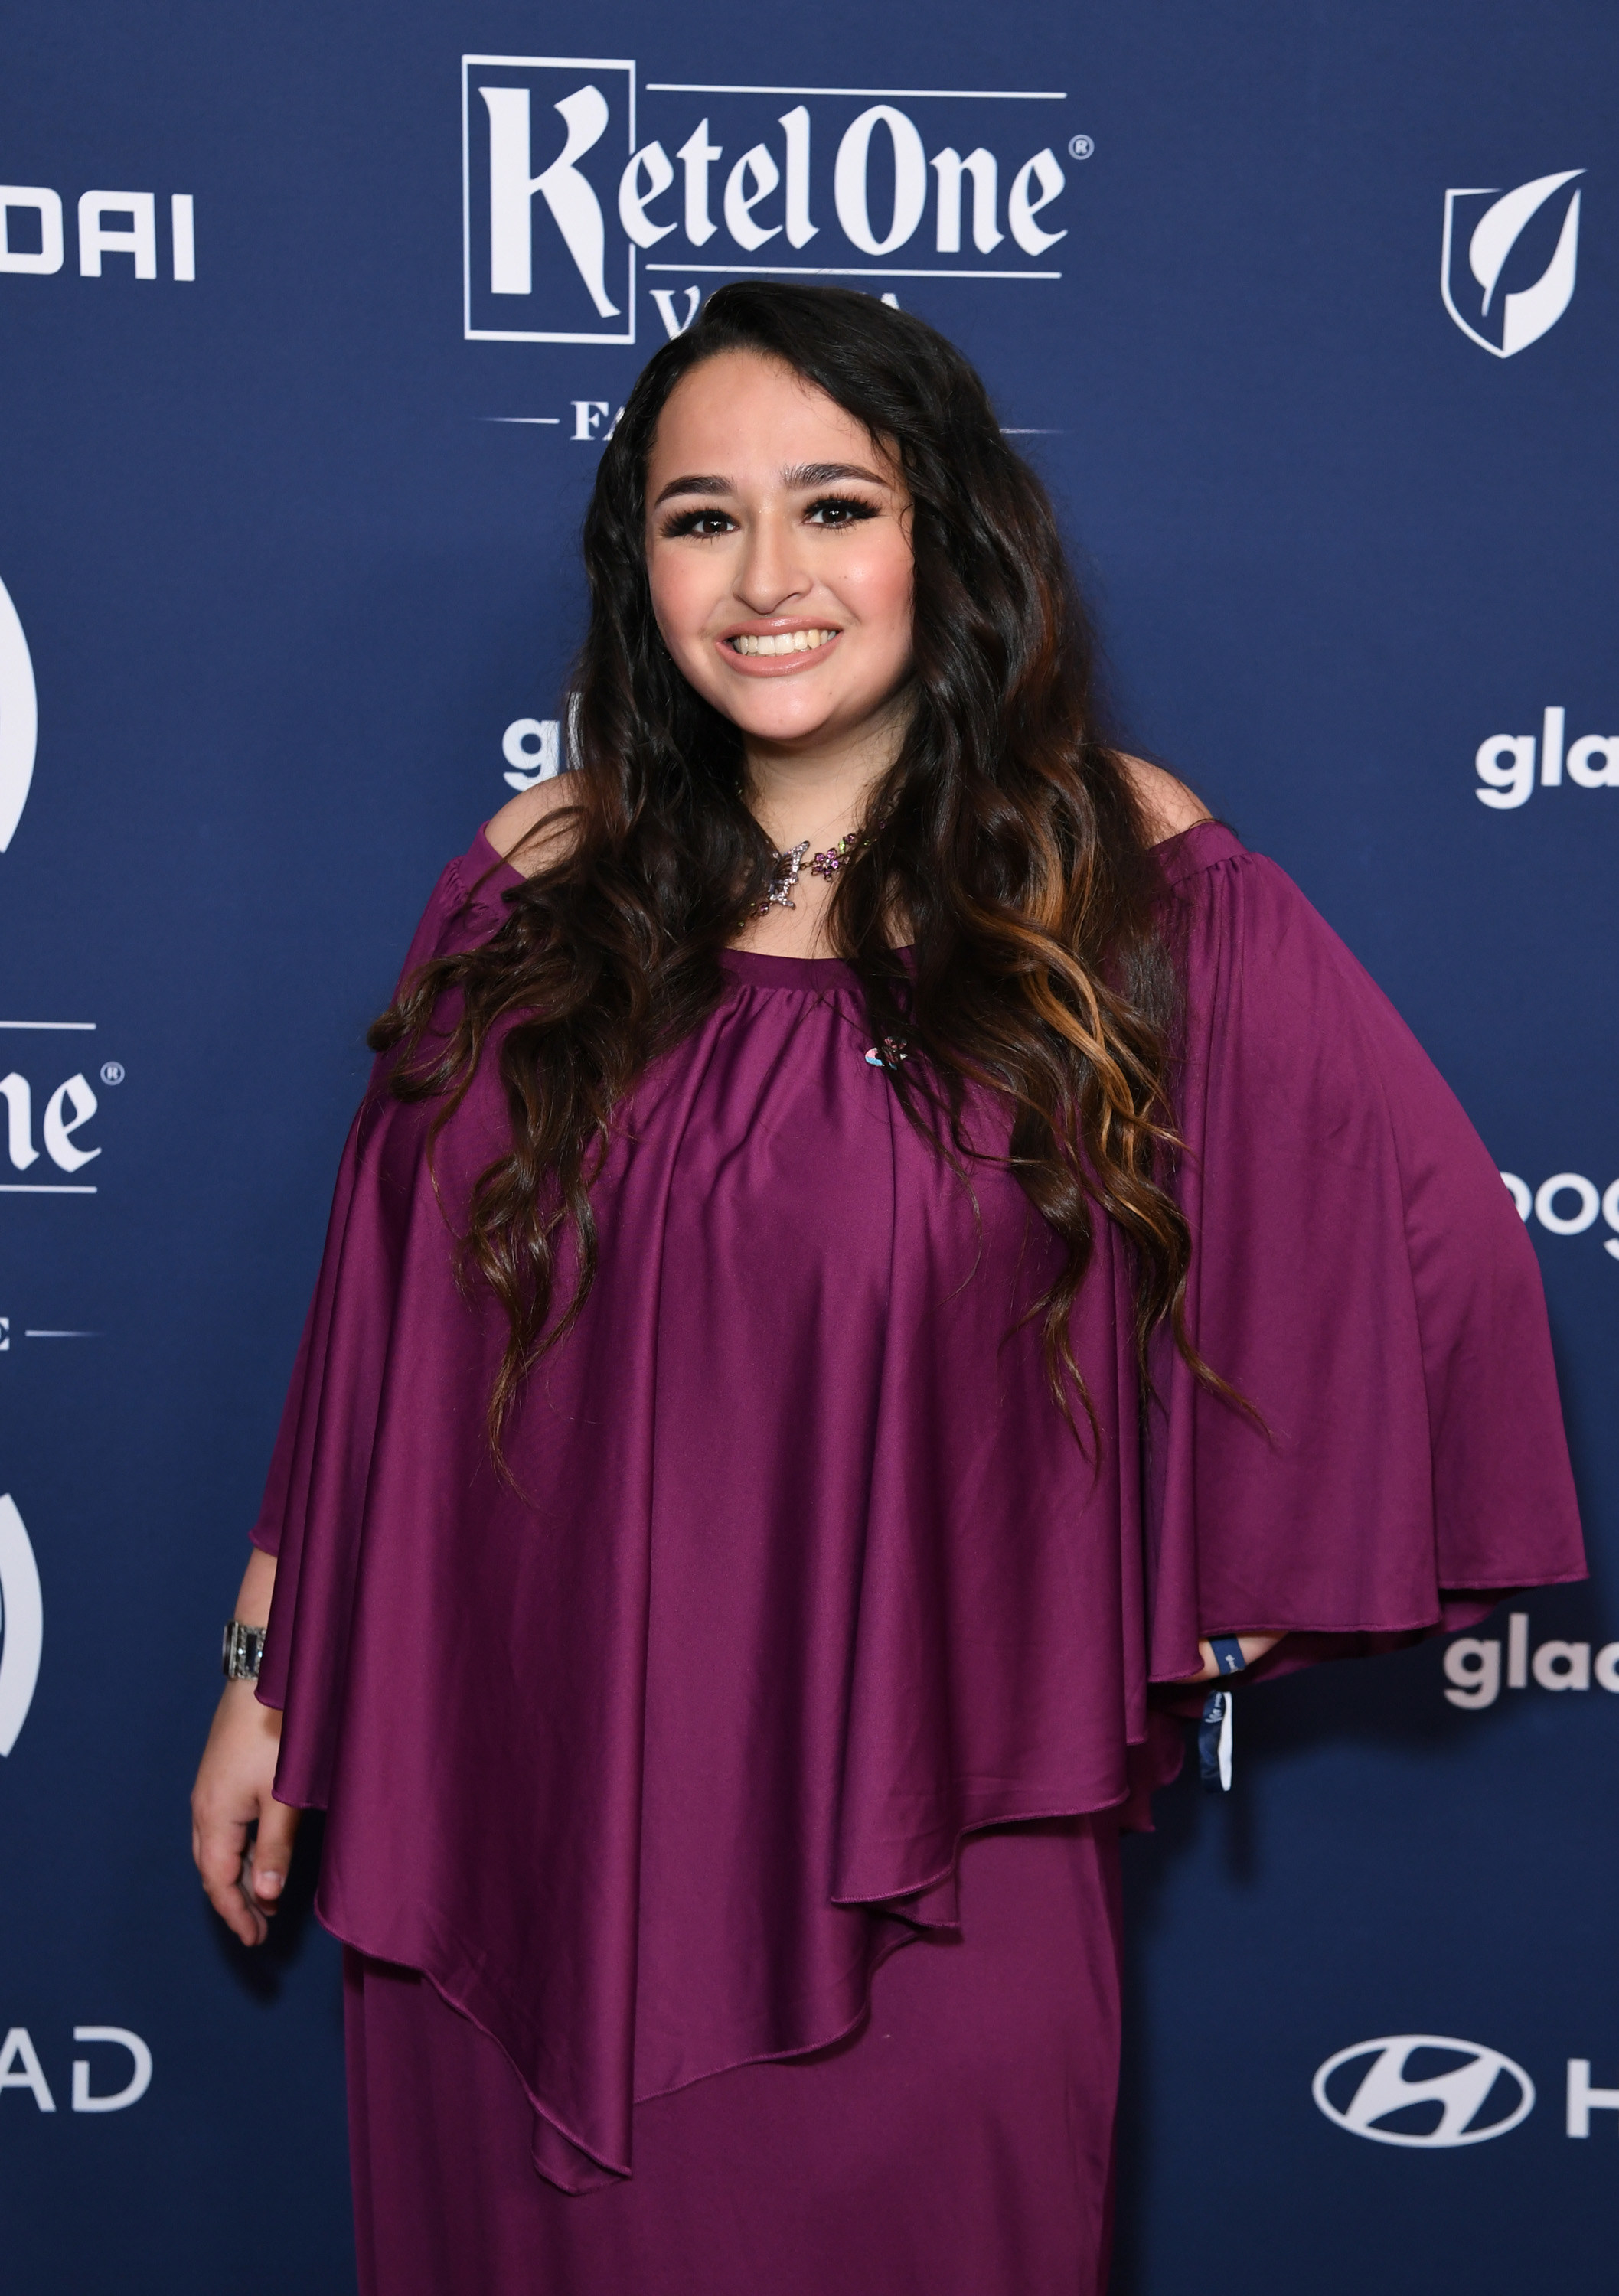 Smiling Jazz on the red carpet in a flowy, off-the-shoulder top and matching bottoms